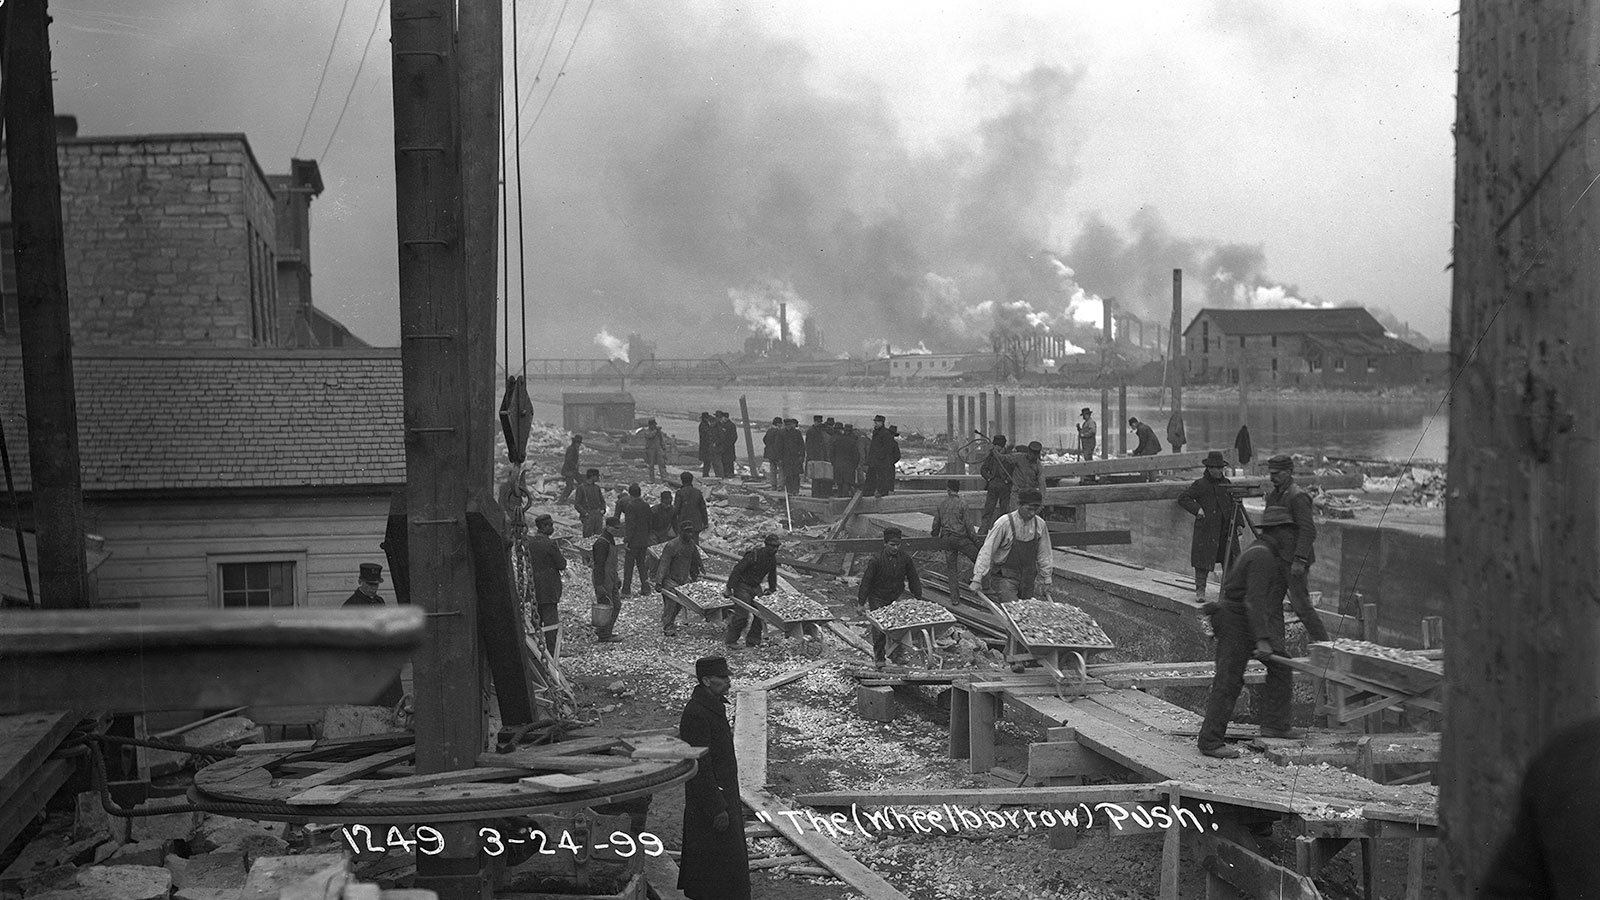 Workers move gravel during lock construction along the Chicago Sanitary and Ship Canal in Joliet, Illinois, on March 24, 1899